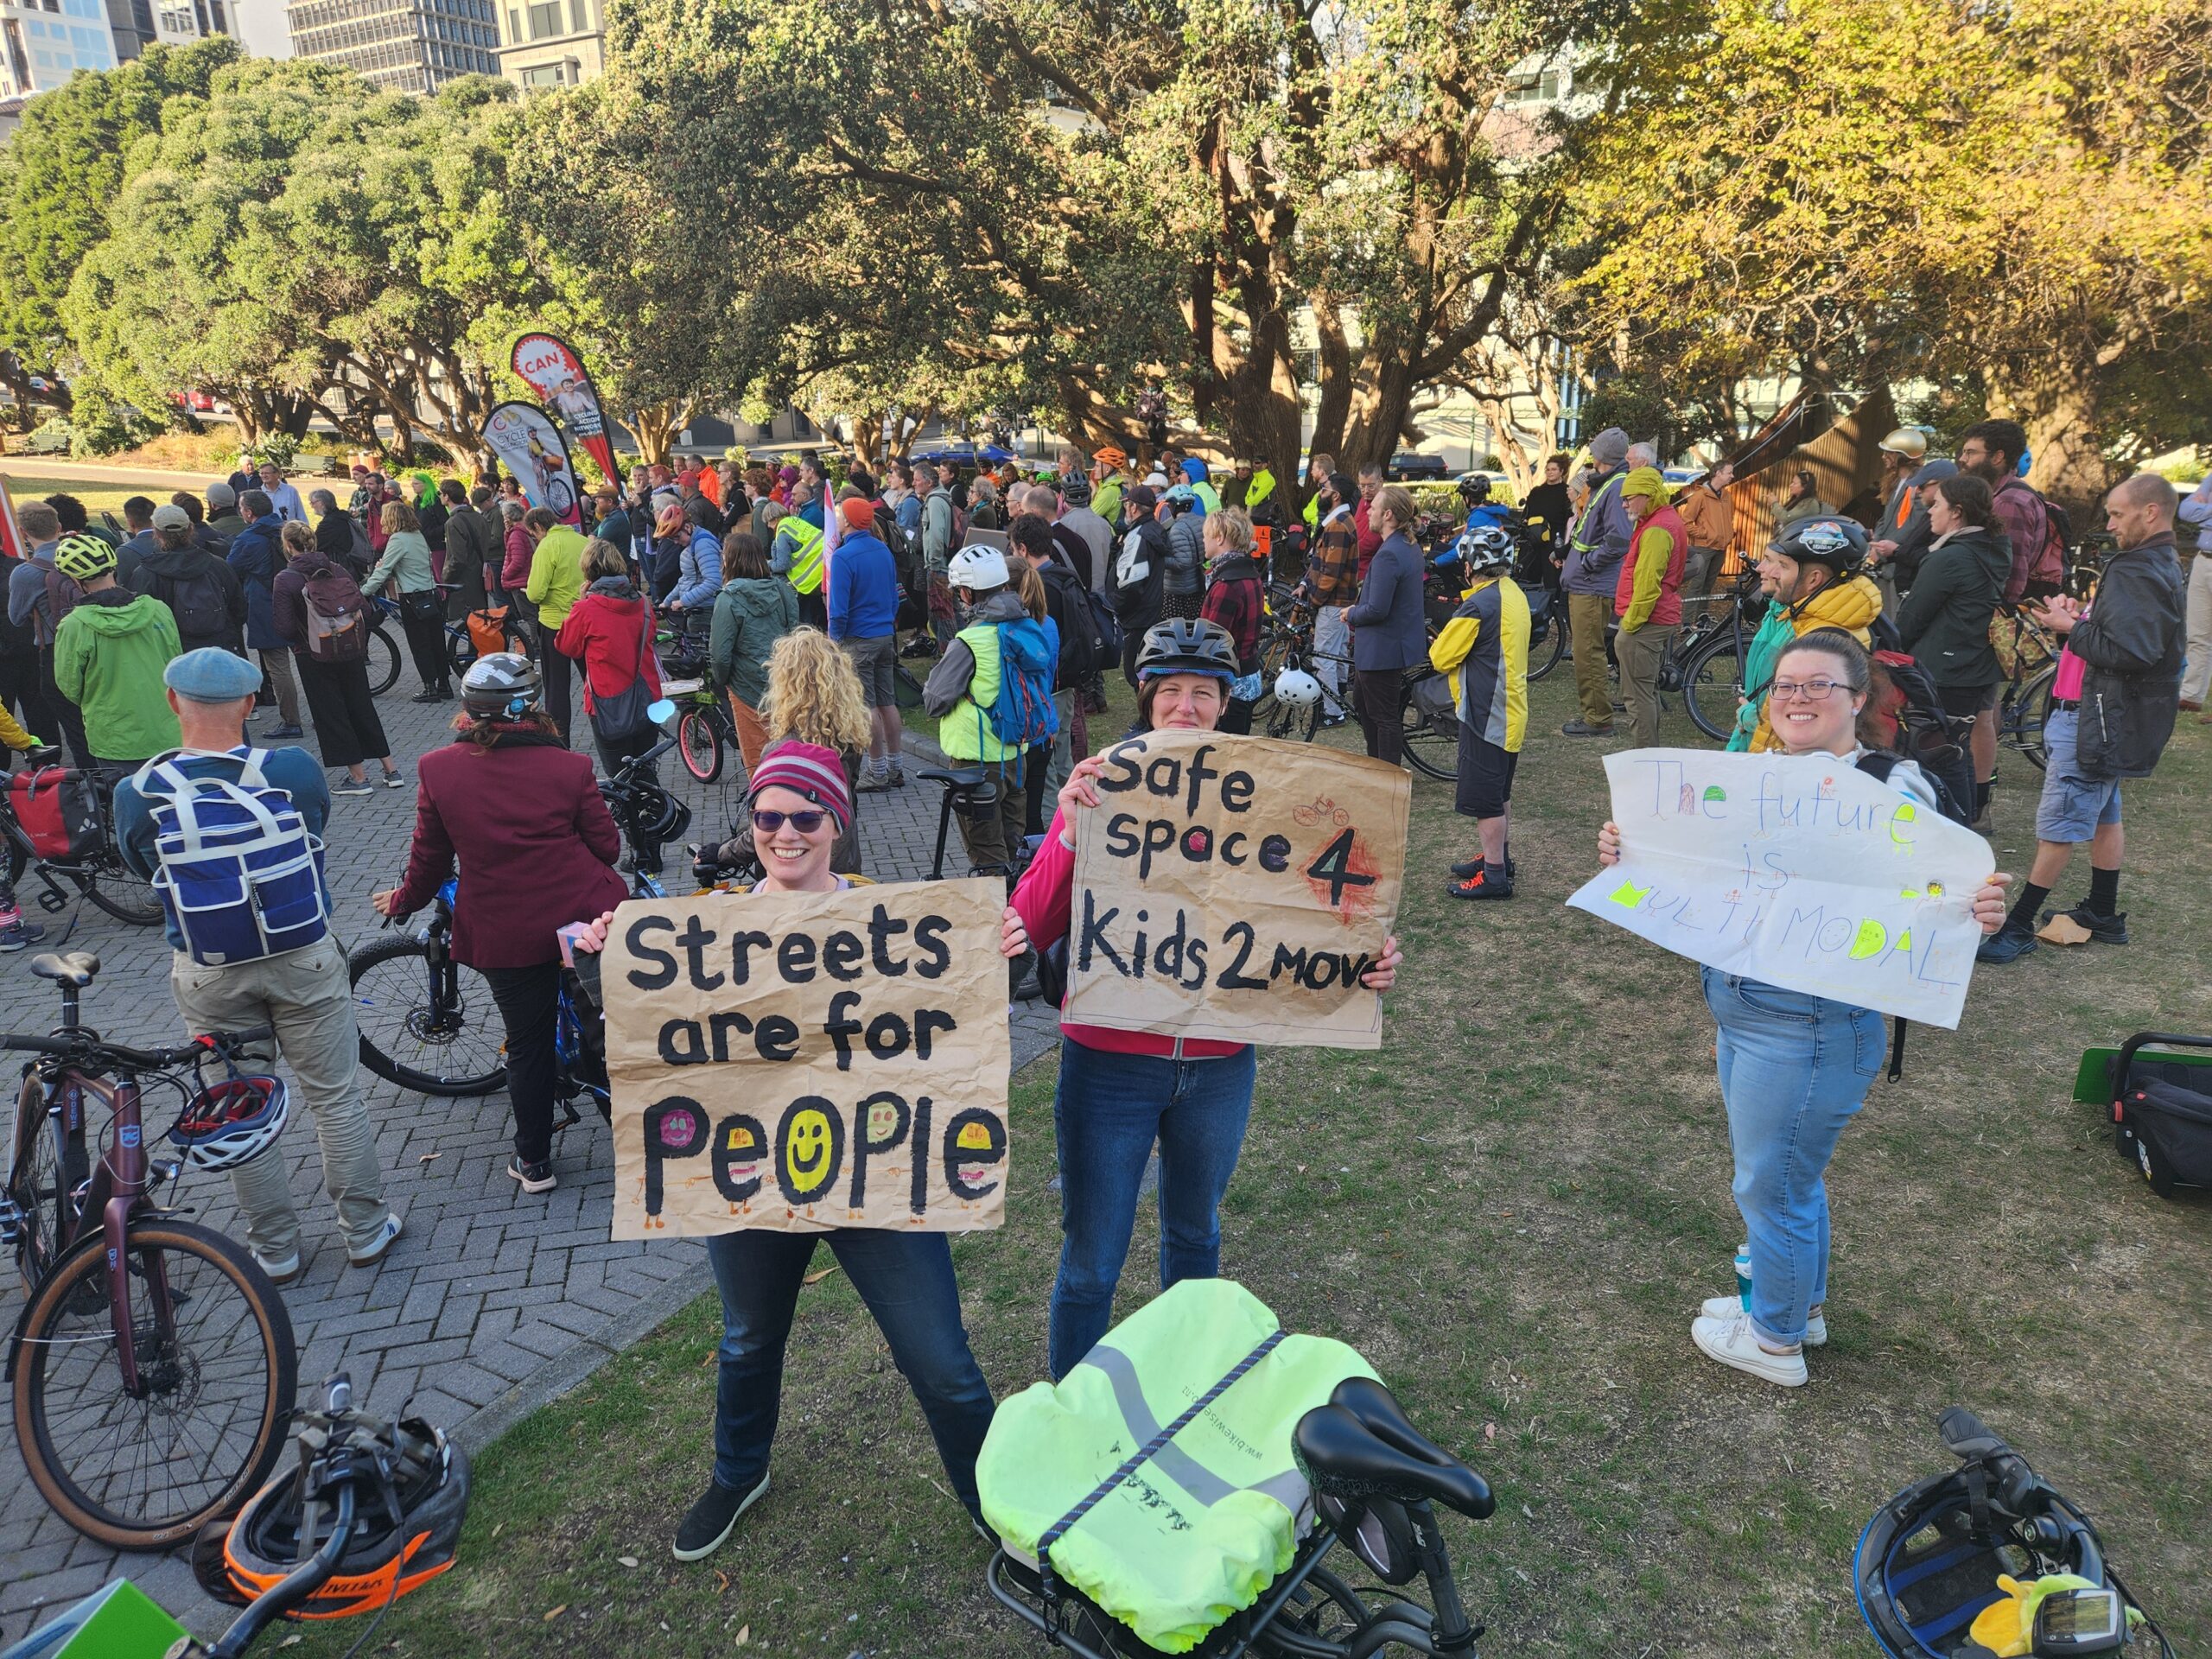 a crowd at the rally, with some people holding signs which say "streets are for people" and "safe space for kids to move". 